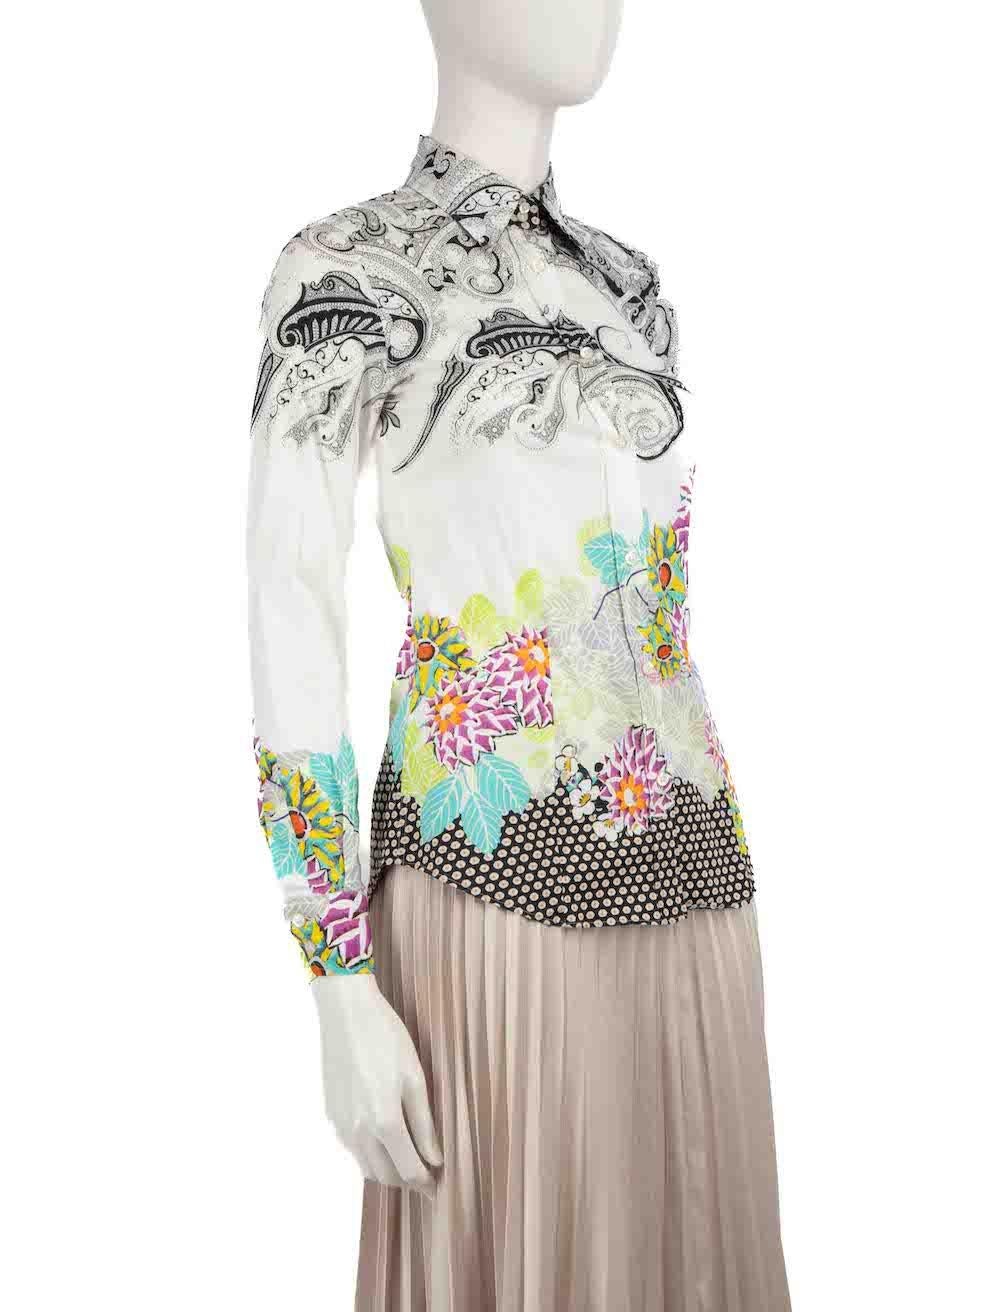 CONDITION is Very good. Minimal wear to shirt is evident. Minimal wear to the front with a small mark. The composition label is missing on this used Etro designer resale item.
 
 
 
 Details
 
 
 Multicolour- White tone
 
 Cotton
 
 Long sleeves